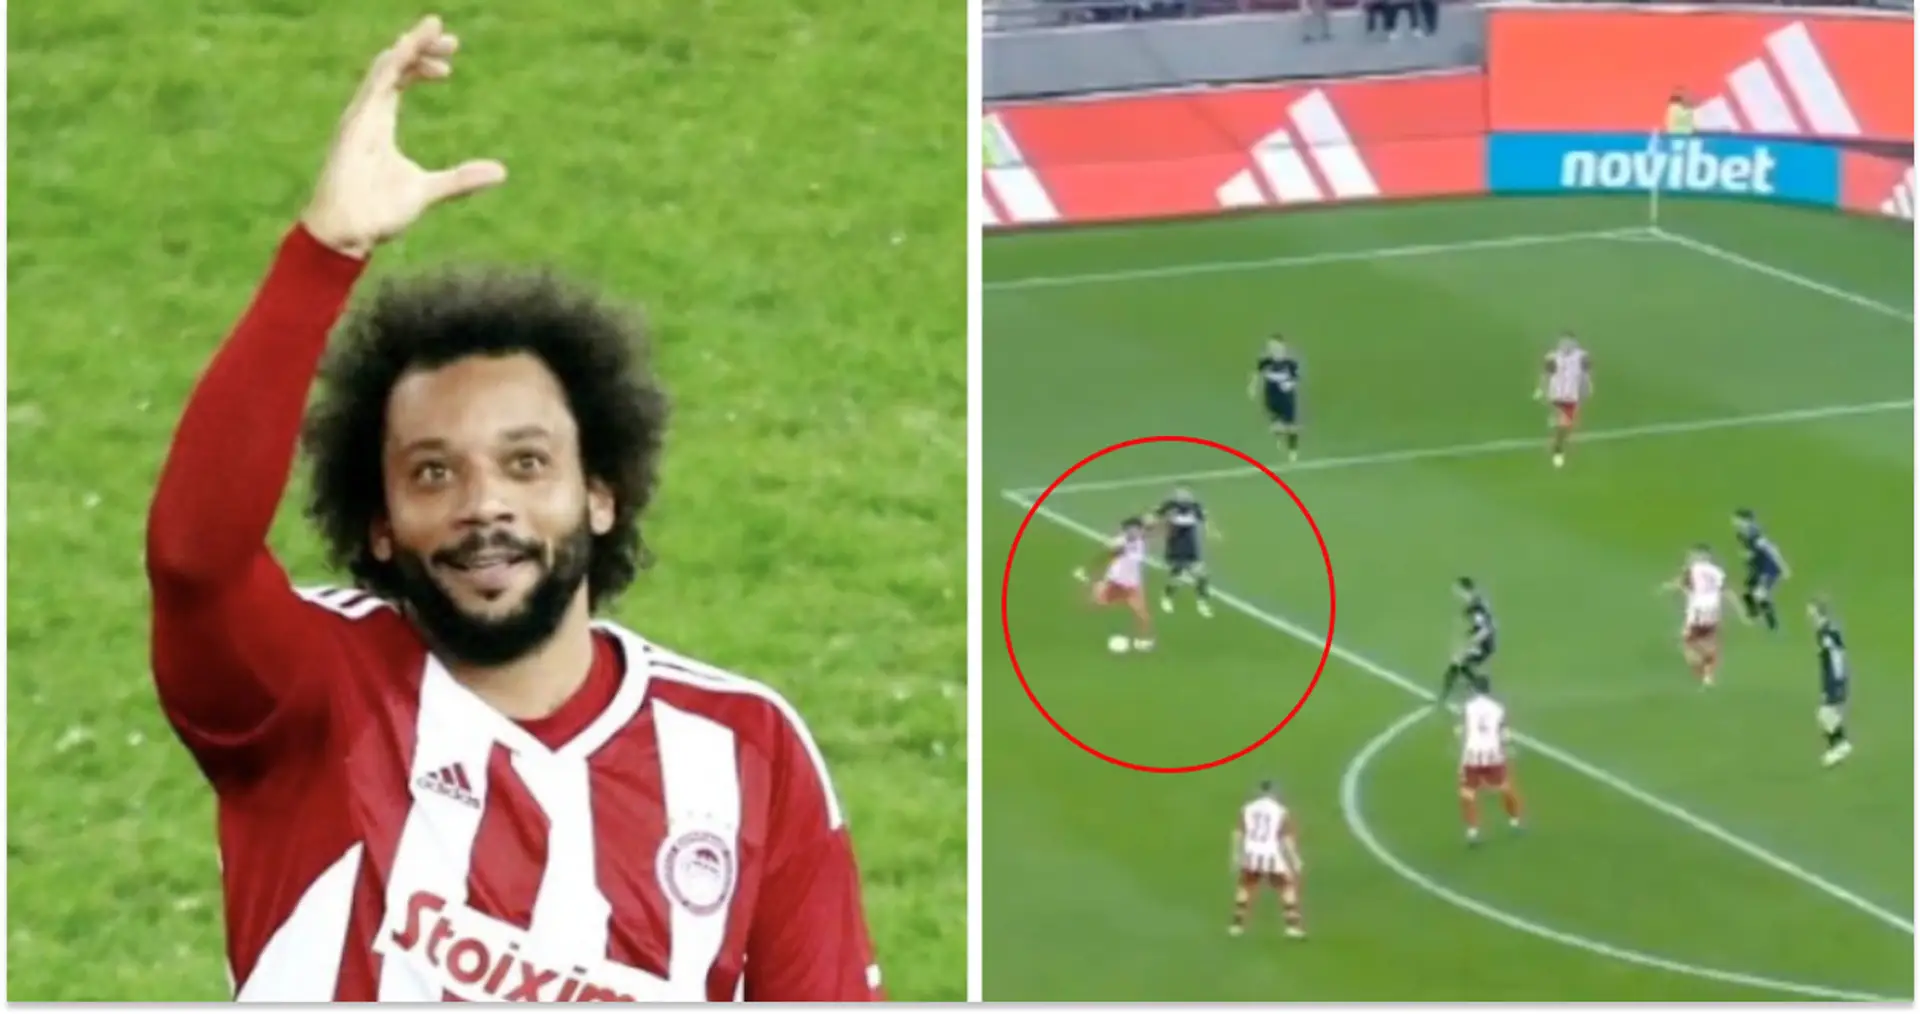 Marcelo starts for Olympiacos for first time since joining club, scores from outside the box